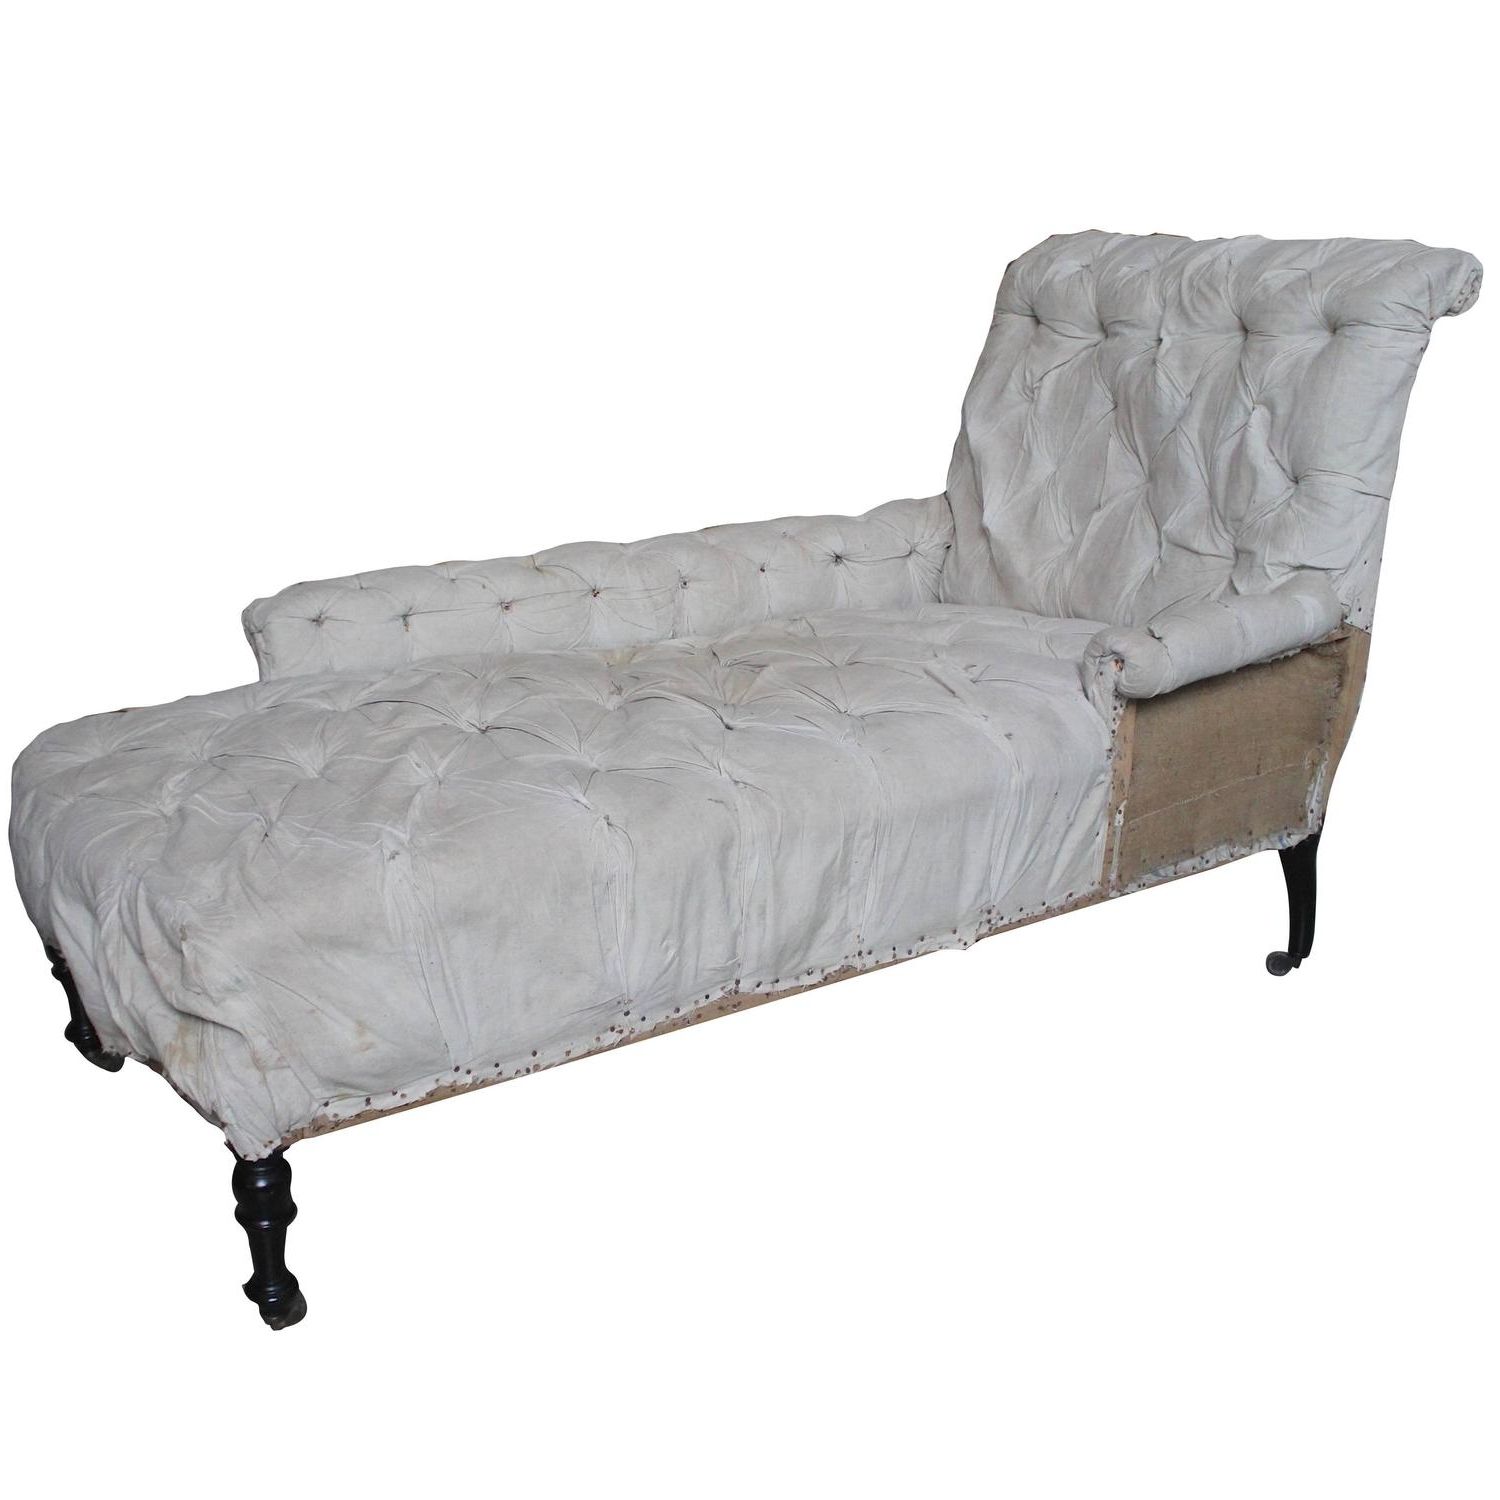 Trendy Tufted Chaise Lounges With Regard To French 19th Century Napoleon Iii Tufted Chaise Longue With One (View 6 of 15)